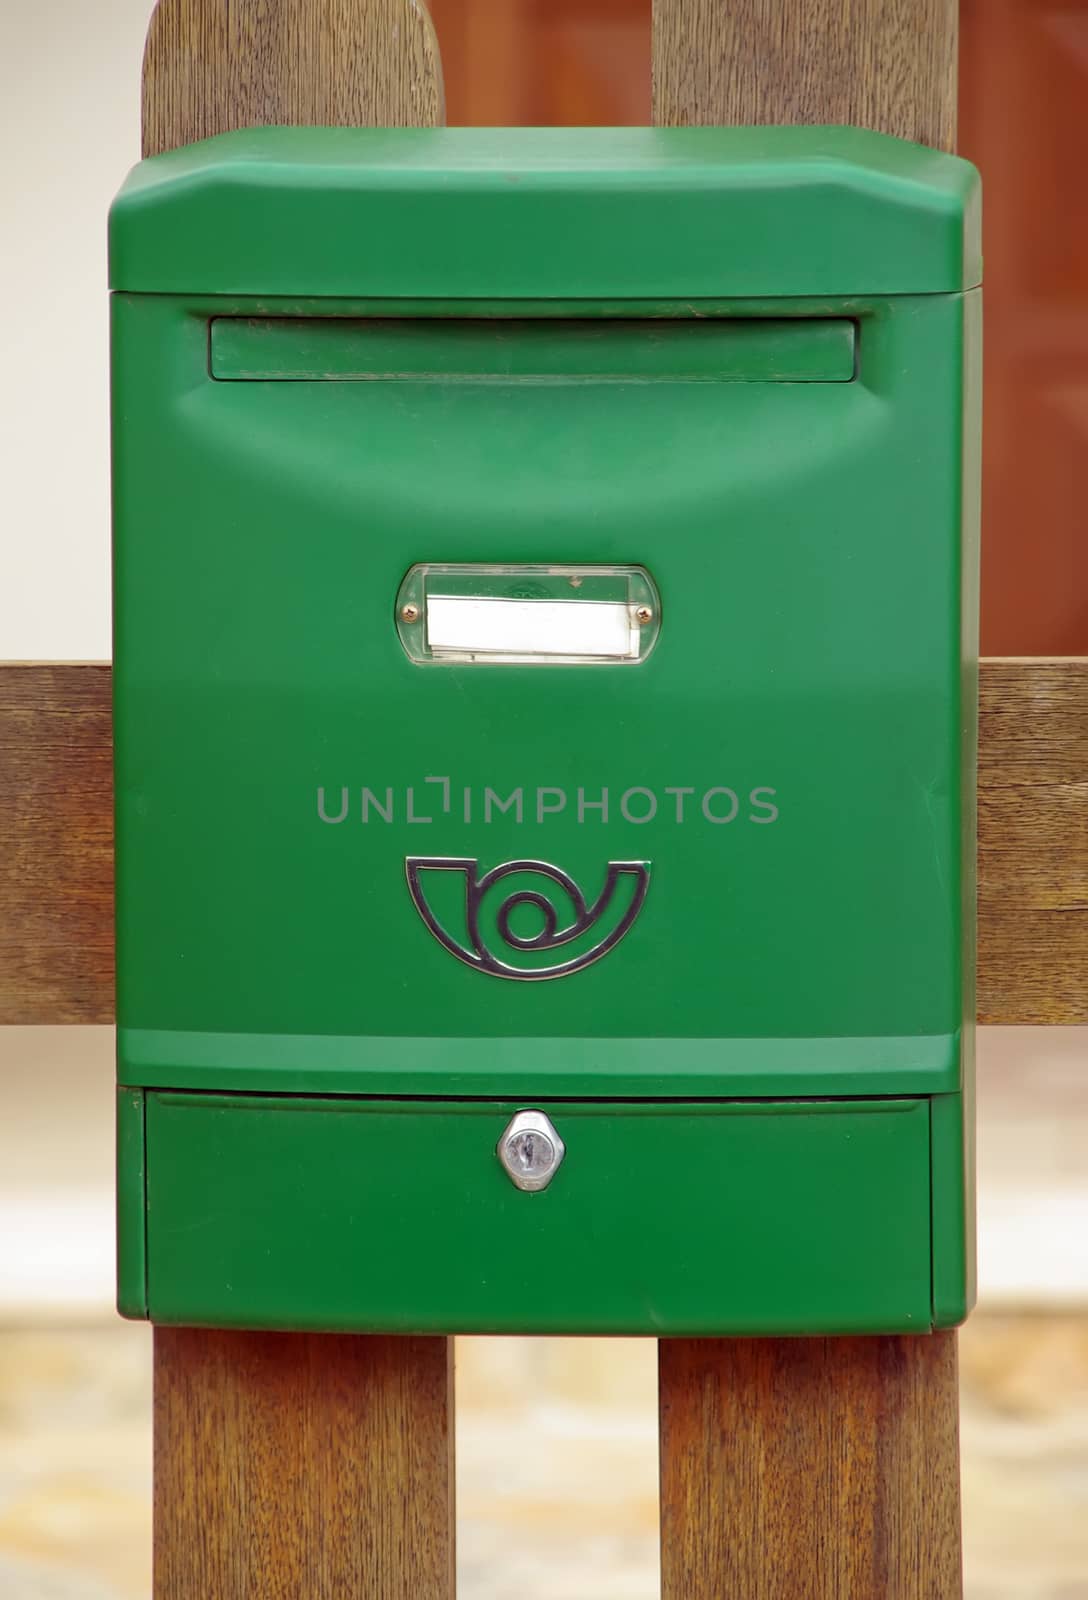 A green plastic mailbox mounted on a wall